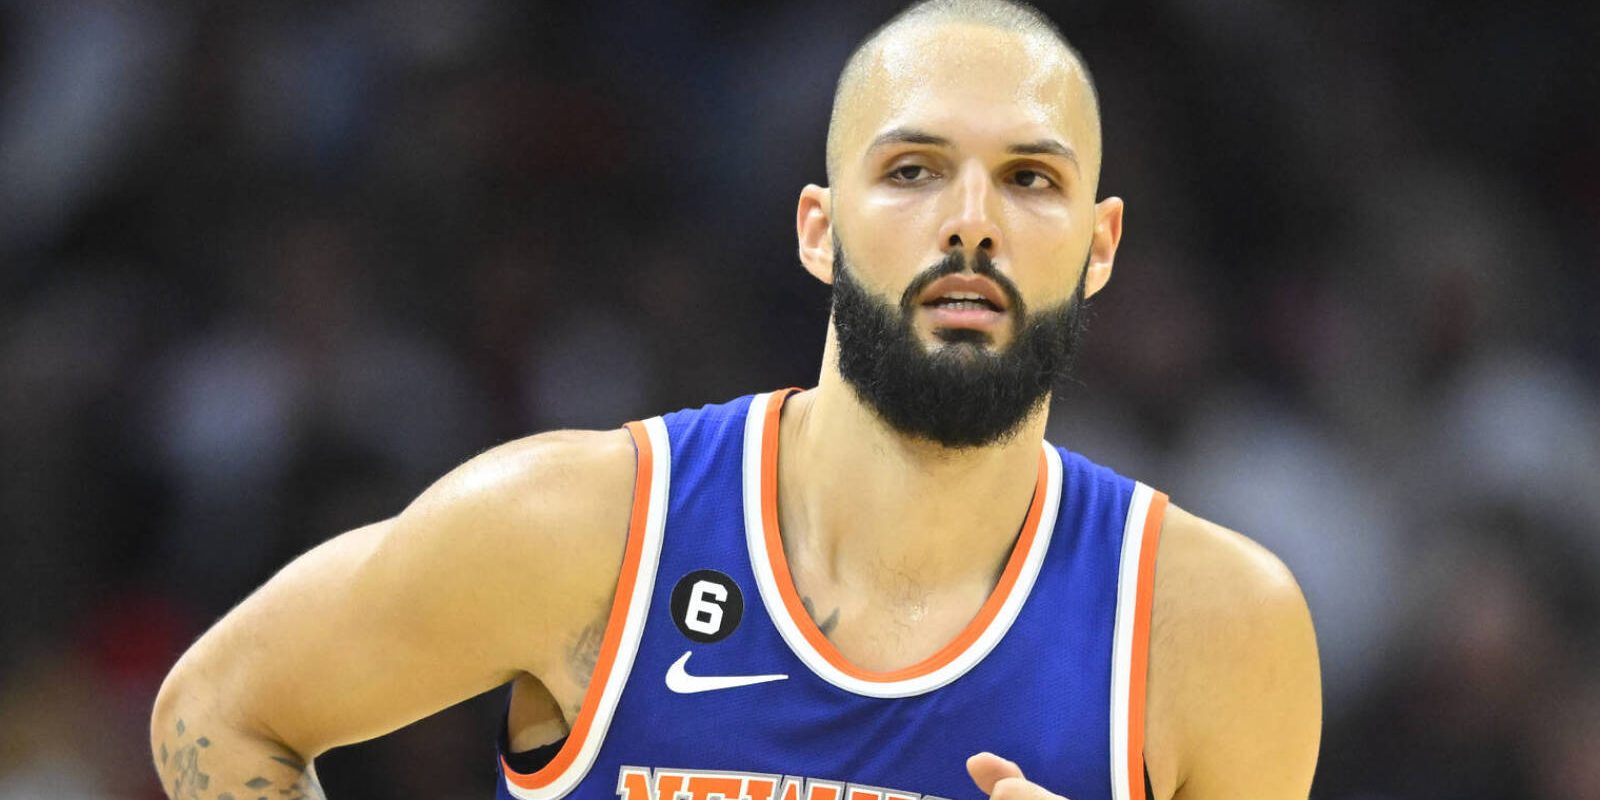 Oct 30, 2022; Cleveland, Ohio, USA; New York Knicks guard Evan Fournier (13) reacts after a three-point basket in the third quarter against the Cleveland Cavaliers at Rocket Mortgage FieldHouse. Mandatory Credit: David Richard-USA TODAY Sports